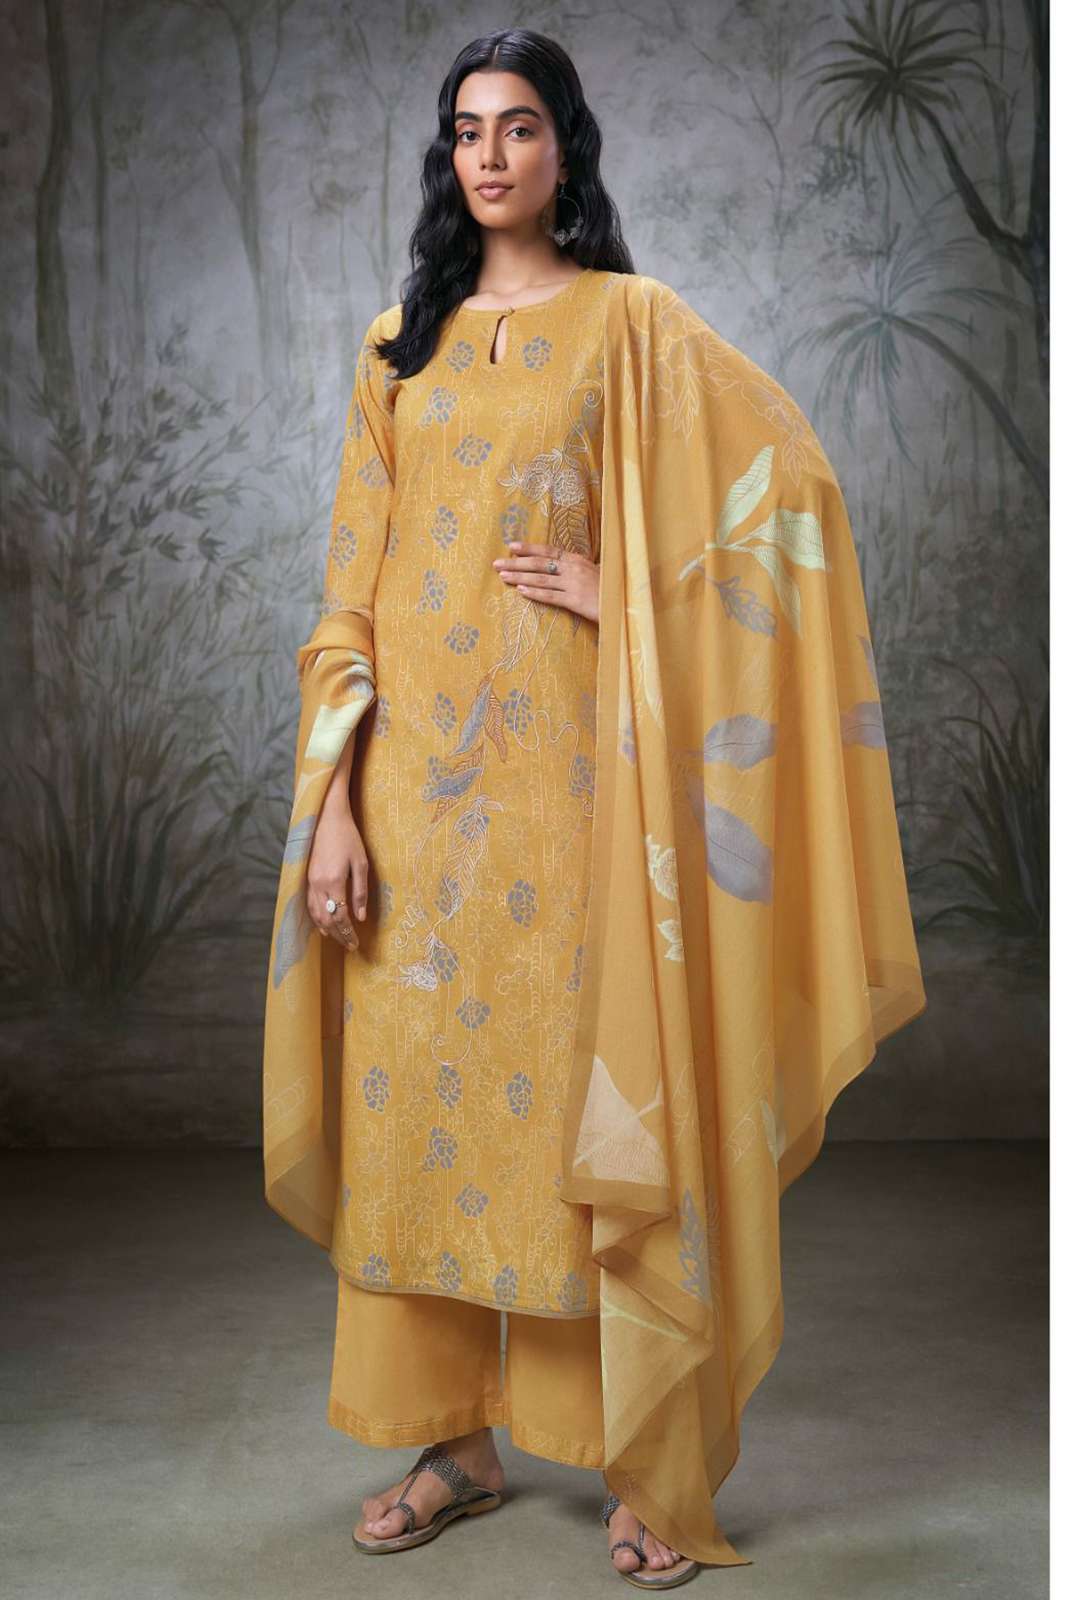 Ganga Cove 2246 COTTON PRINTED WITH EMBROIDERY, HAND WORK AND EMBORIDERY ANCHOR ON DAMAN SUIT